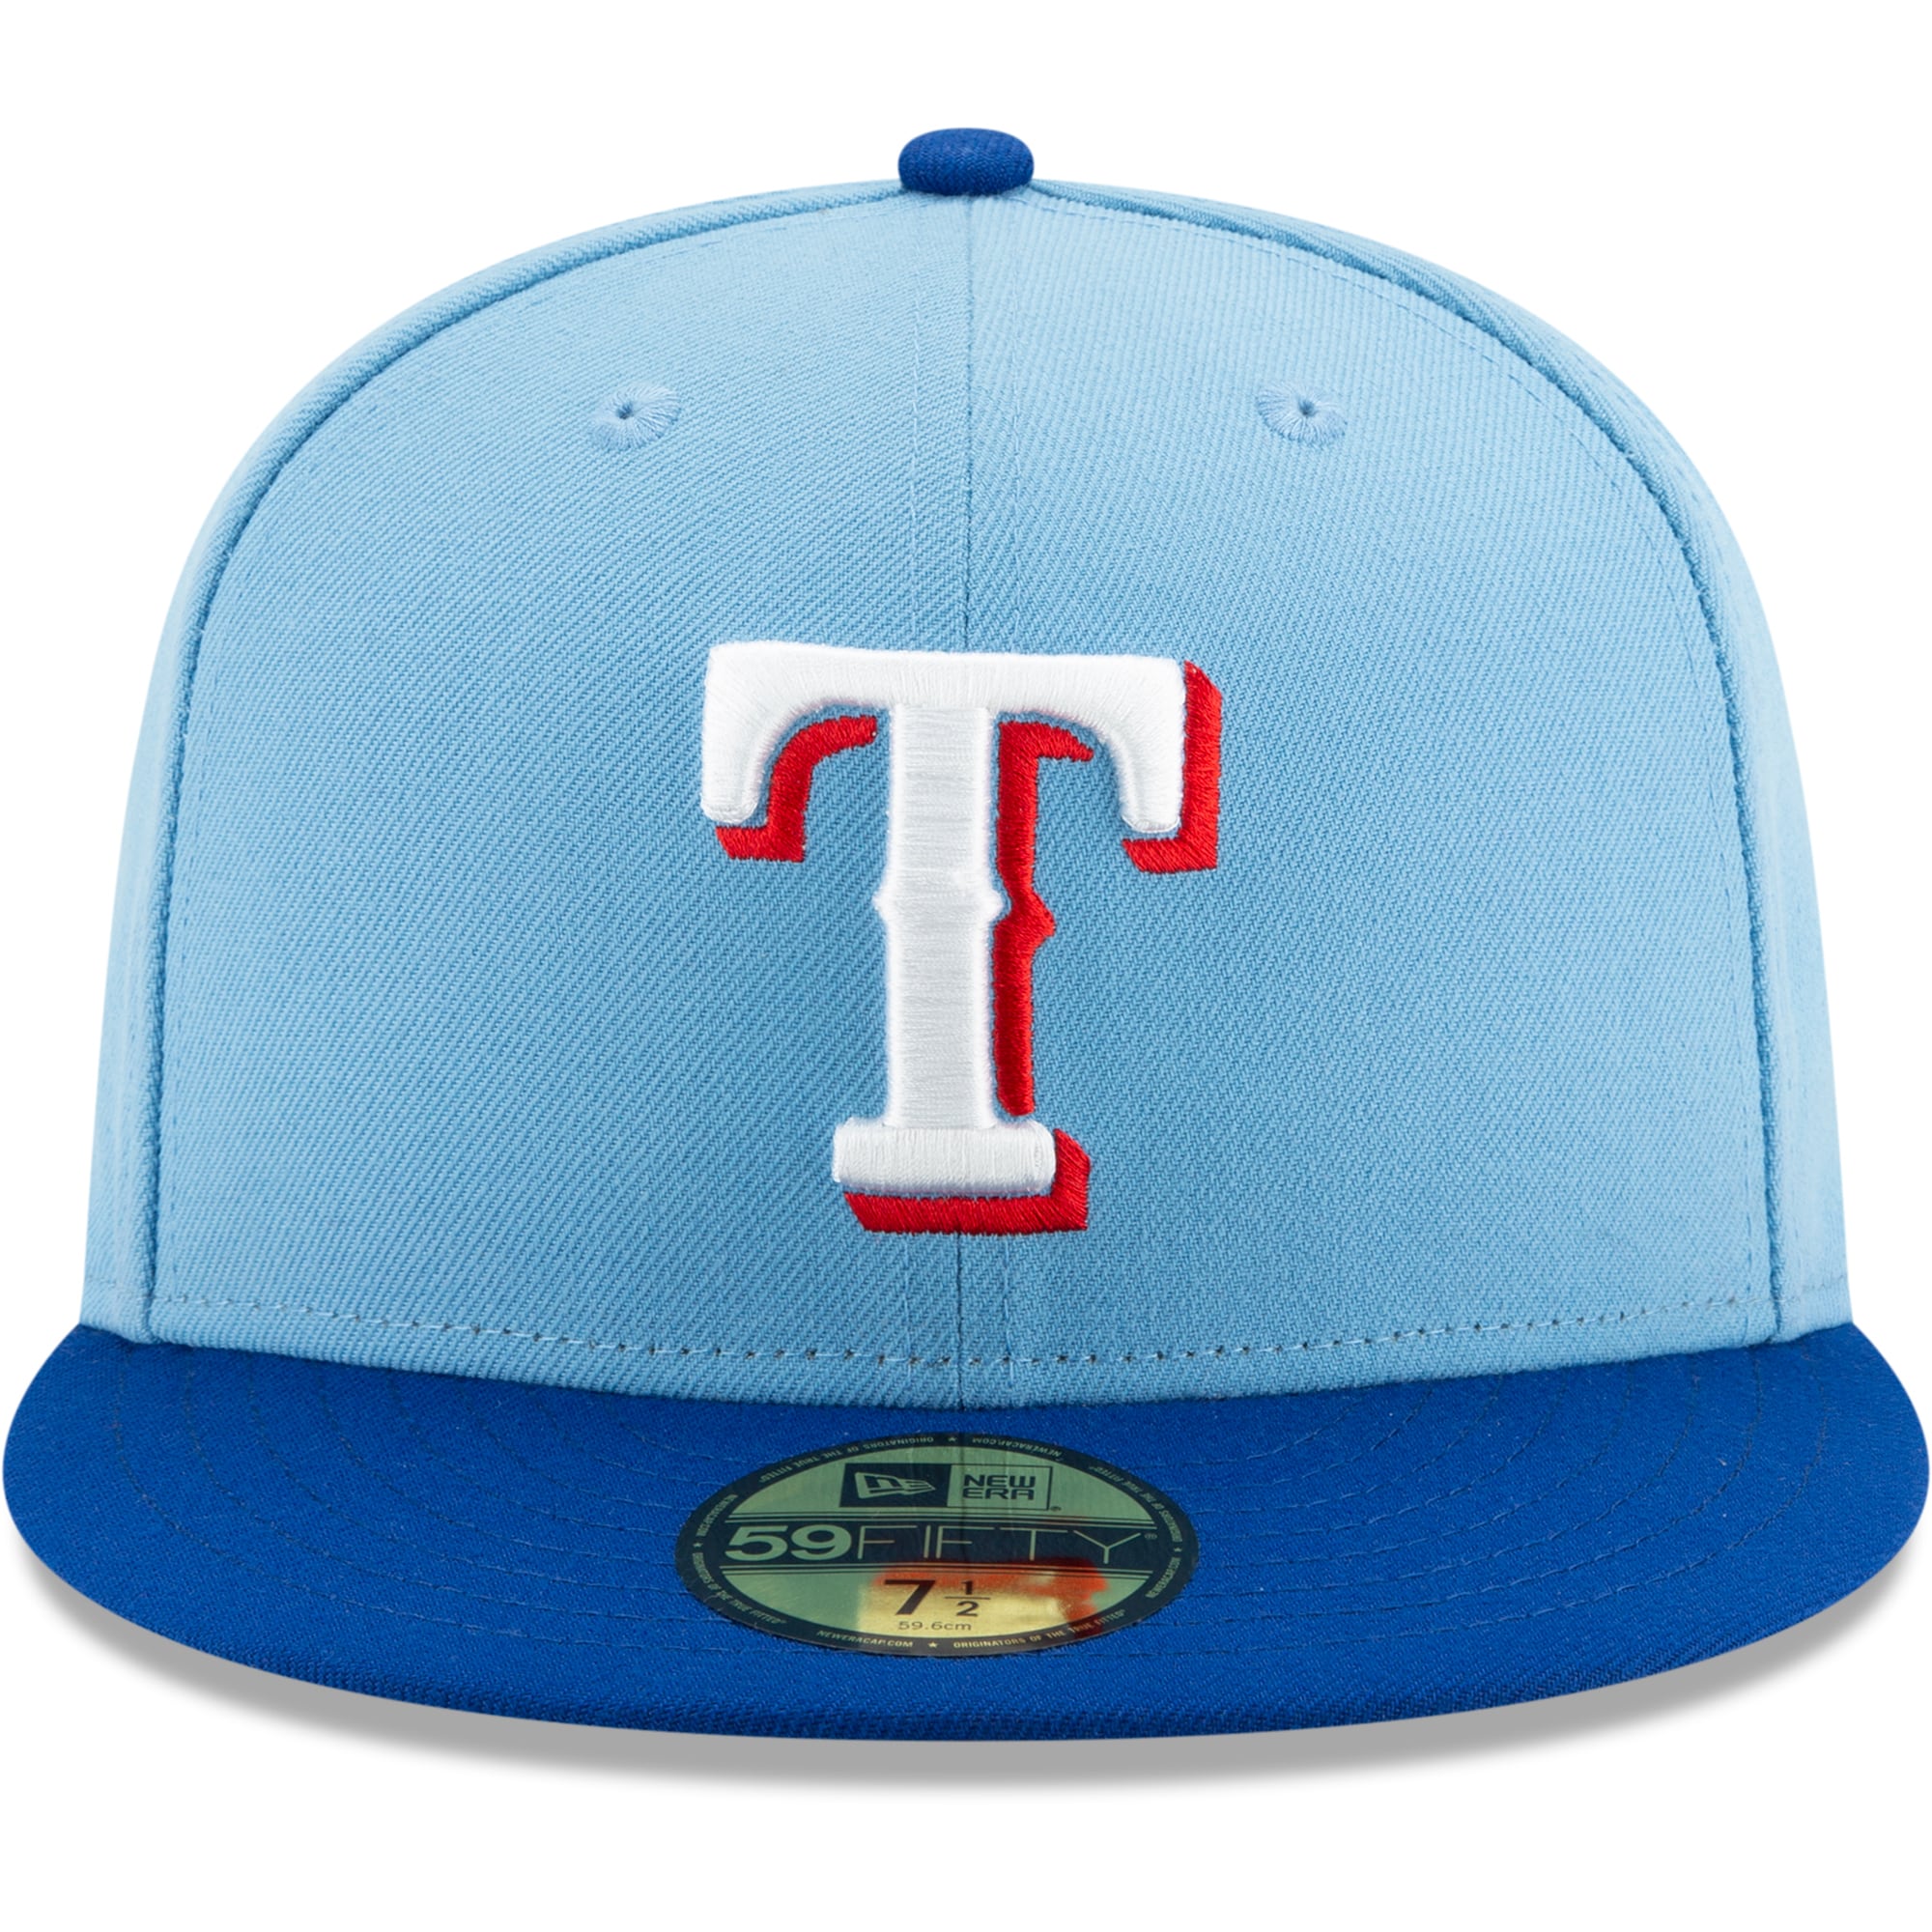 Men's New Era Texas Rangers Light Blue/Royal On-Field Authentic Collection 59FIFTY Fitted Hat - image 2 of 4